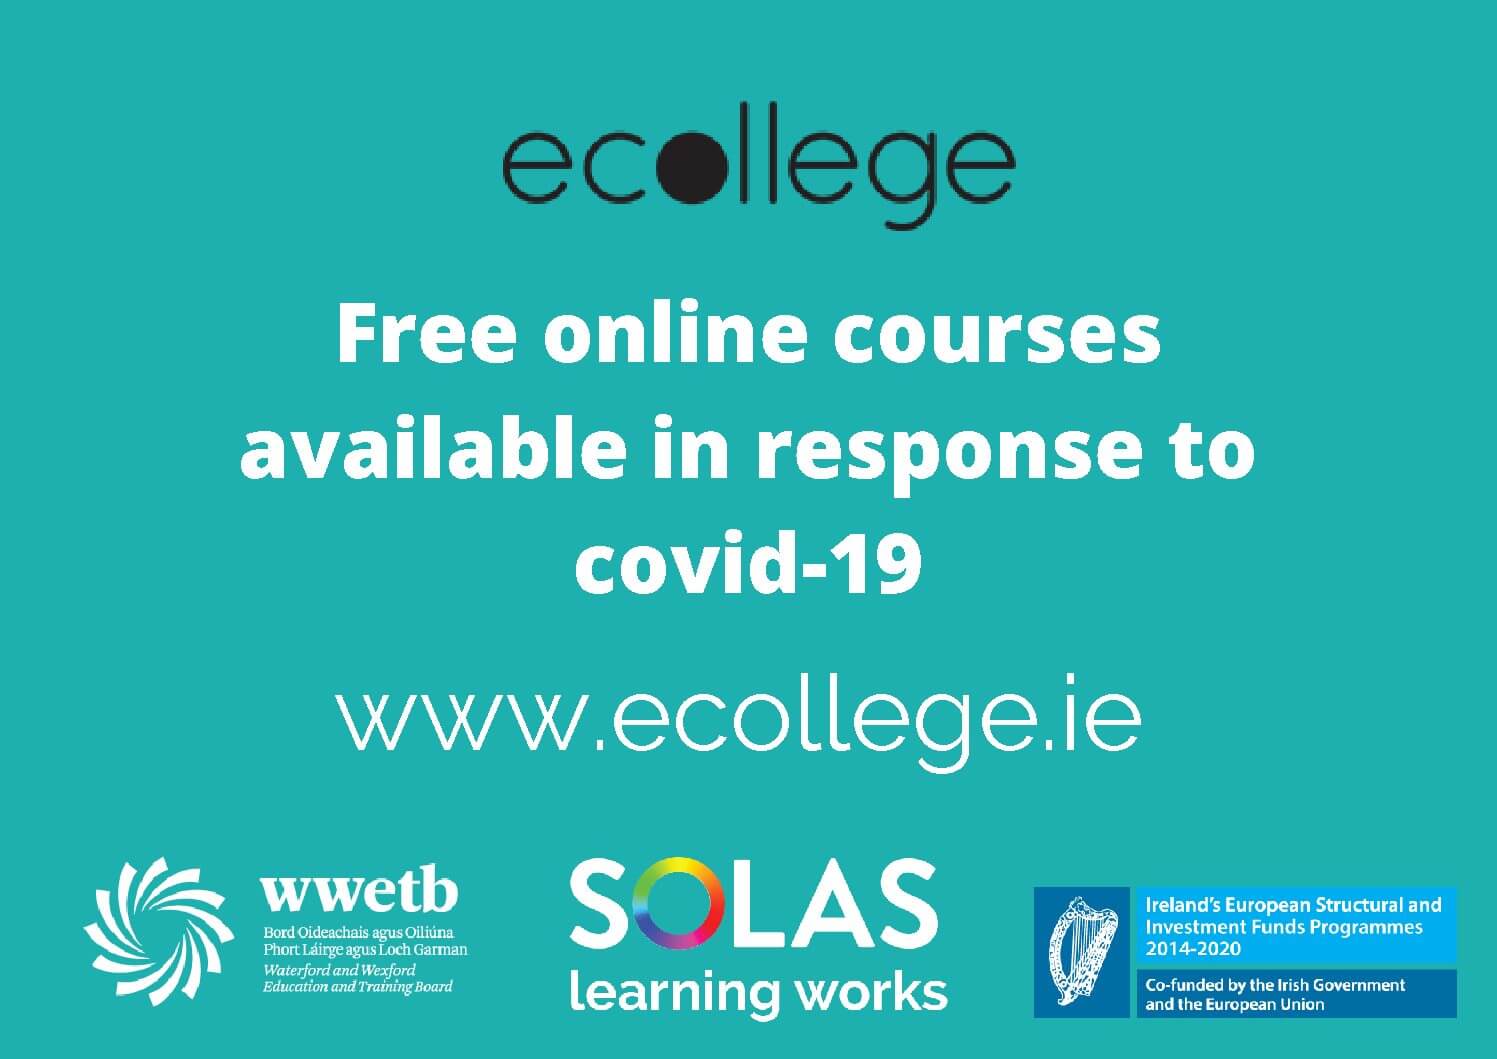 Free online courses available in response to Covid-19